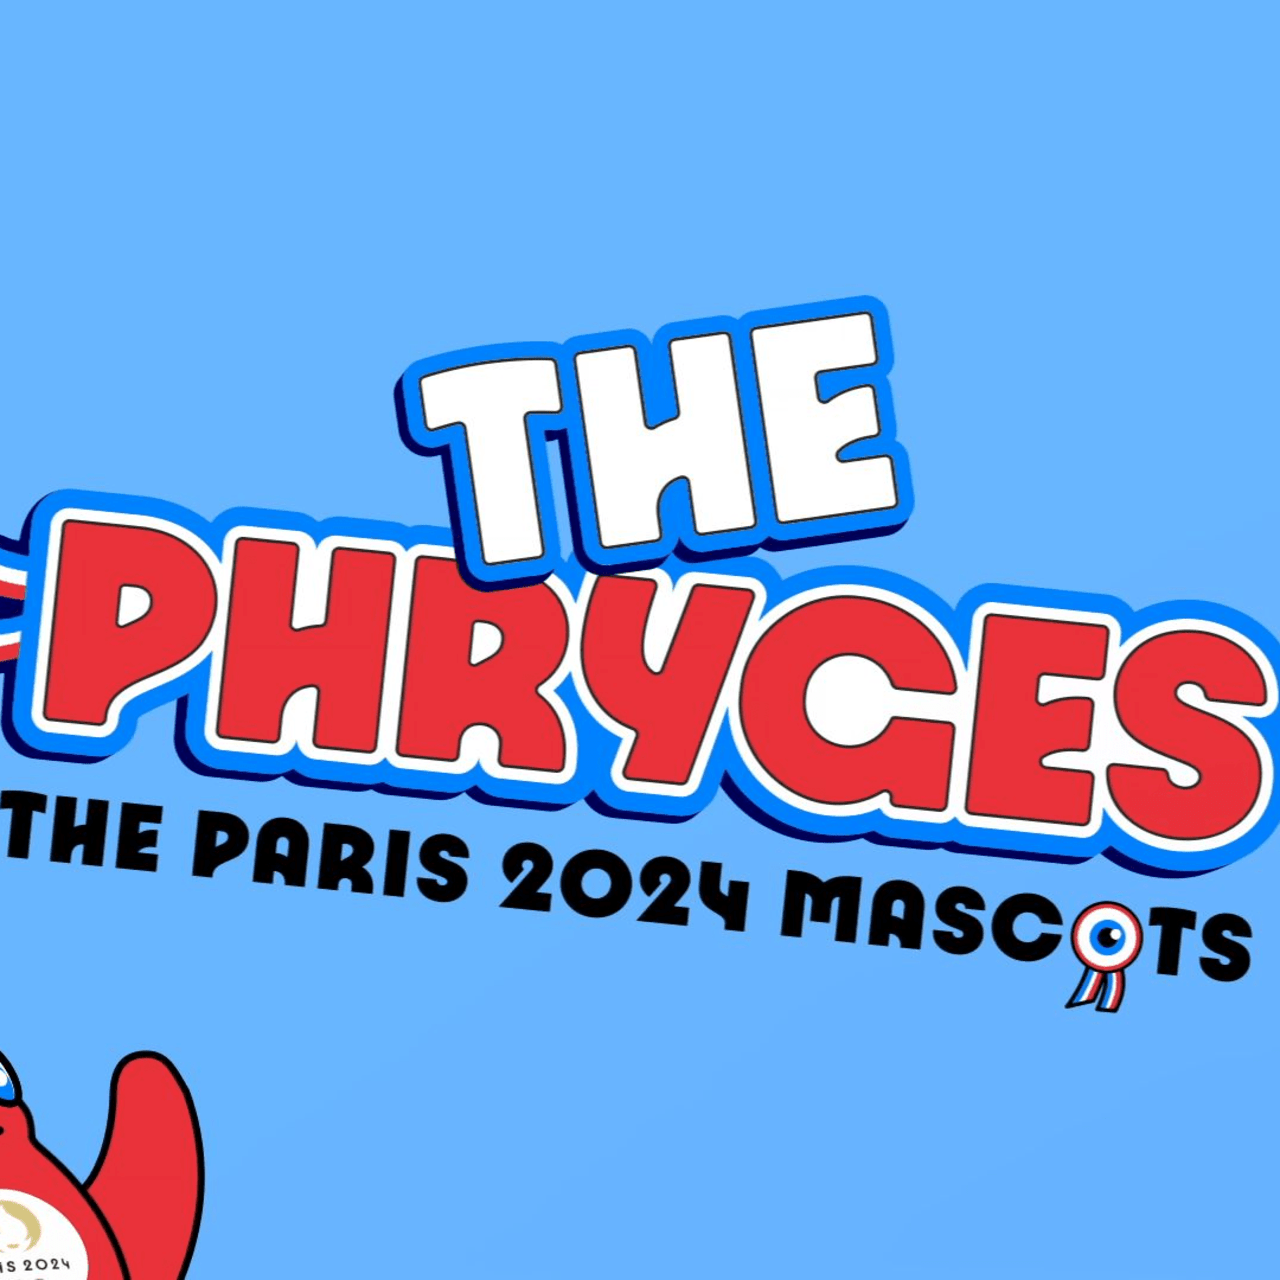 Meet the Phryges, the vibrant mascots of the Paris 2024 Olympics!